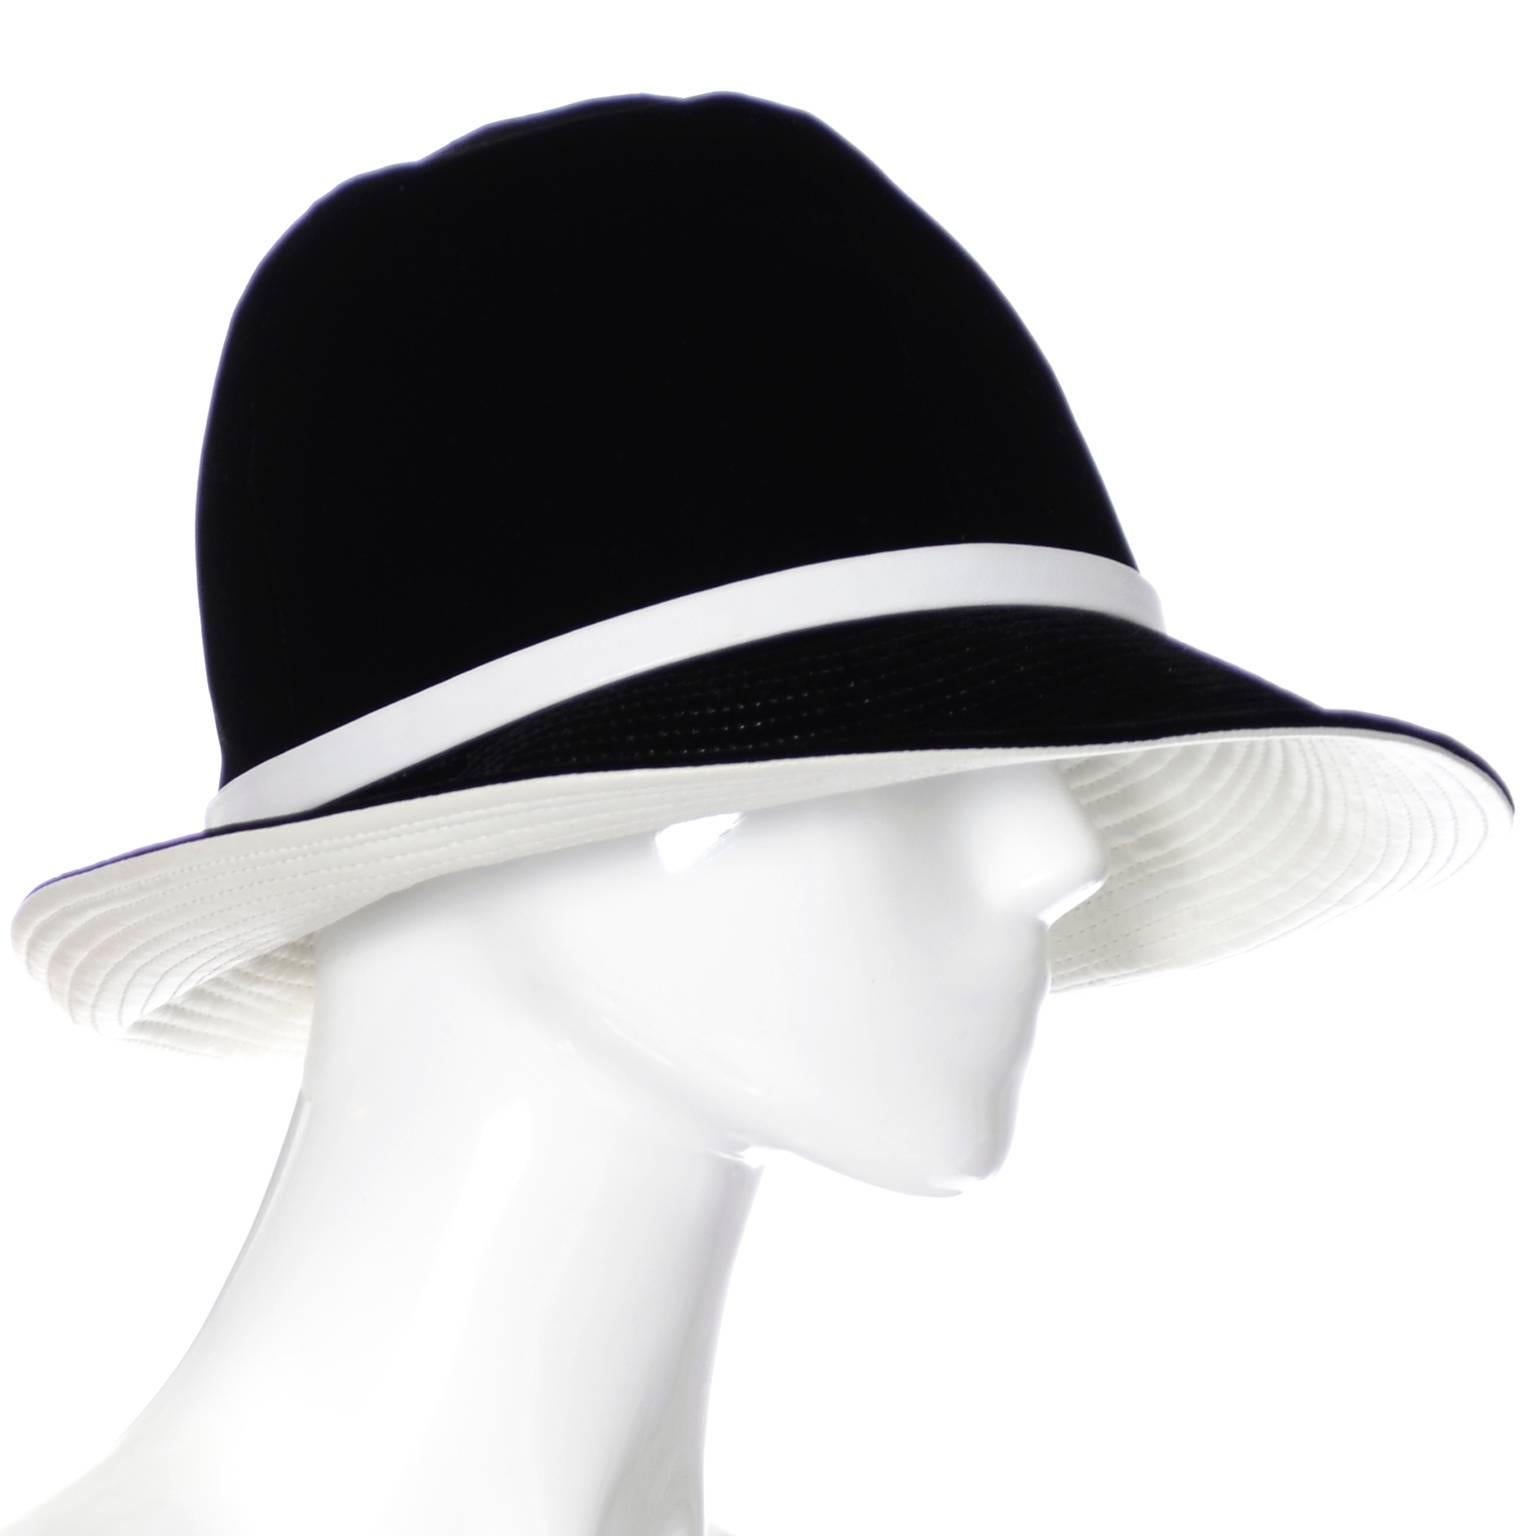 This is an outstanding vintage 60's hat from wonderful John Harberger, or Mr. John. This hat was purchased at I Magnin and is made of black velvet on the outside, with beautiful white leather trim and brim lining.The hat appears to have barely if